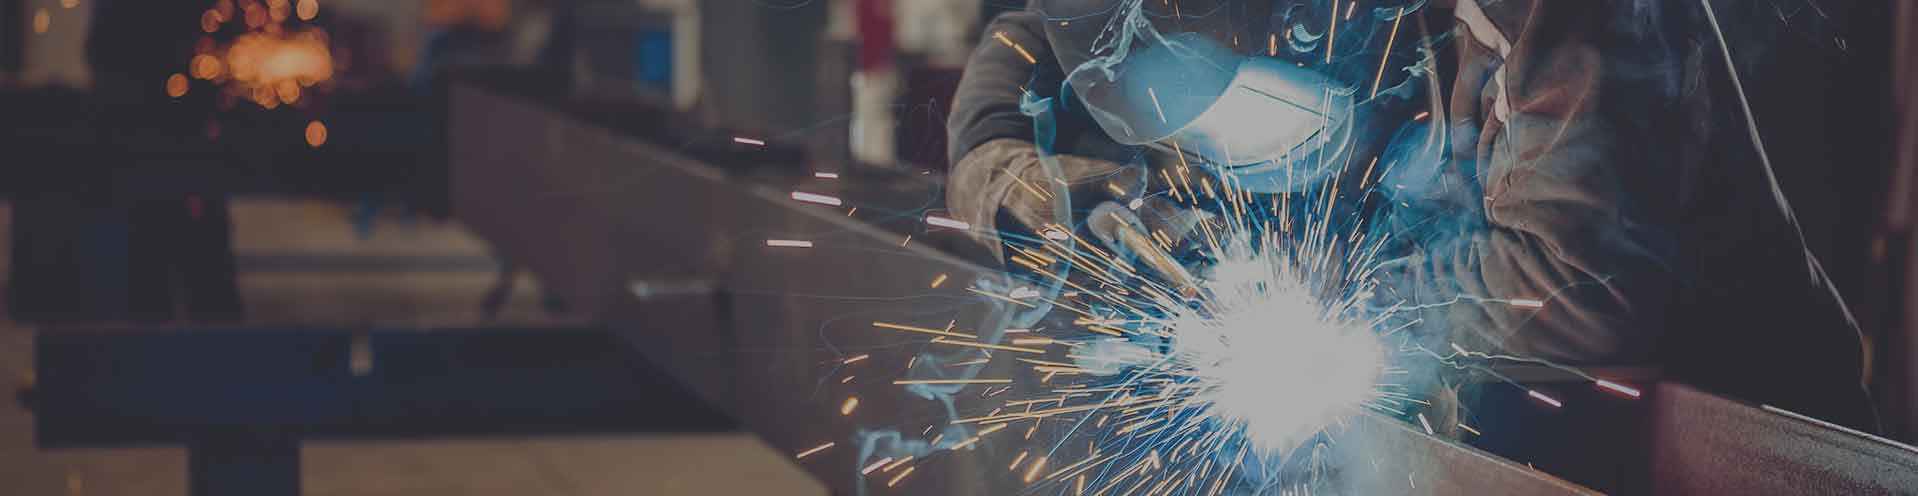 The 10 Best Welding Services in Sydney NSW | Oneflare